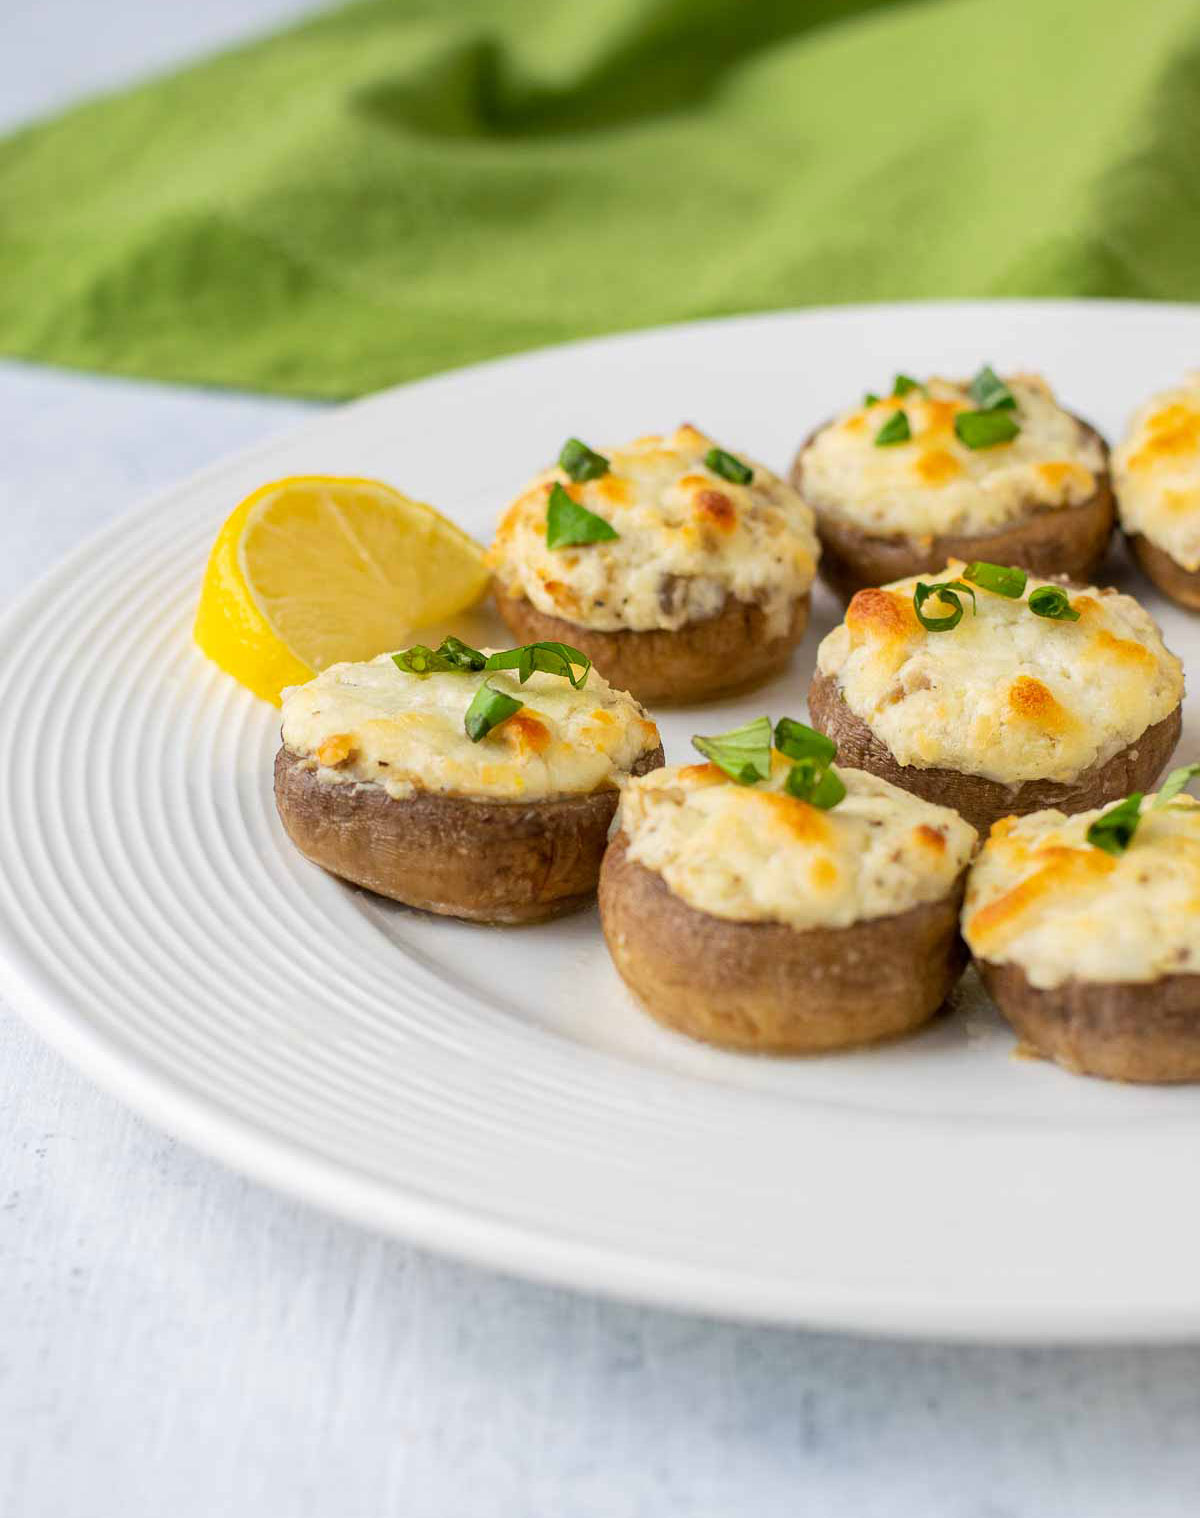 cheese-stuffed mushrooms on plate with lemon and basil ribbons.